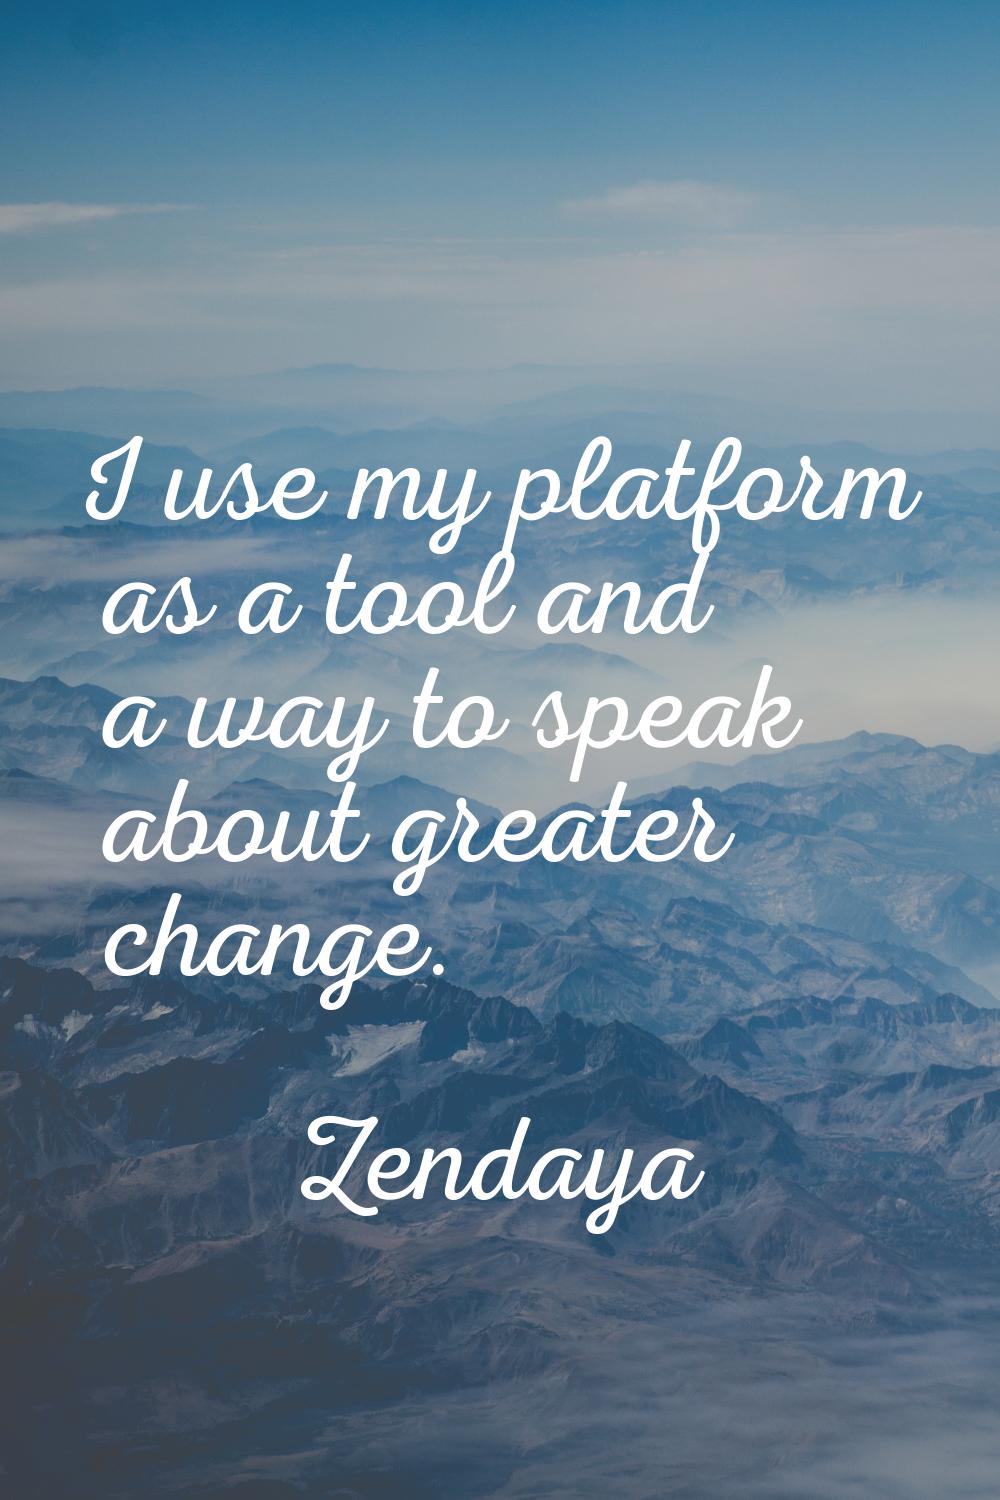 I use my platform as a tool and a way to speak about greater change.